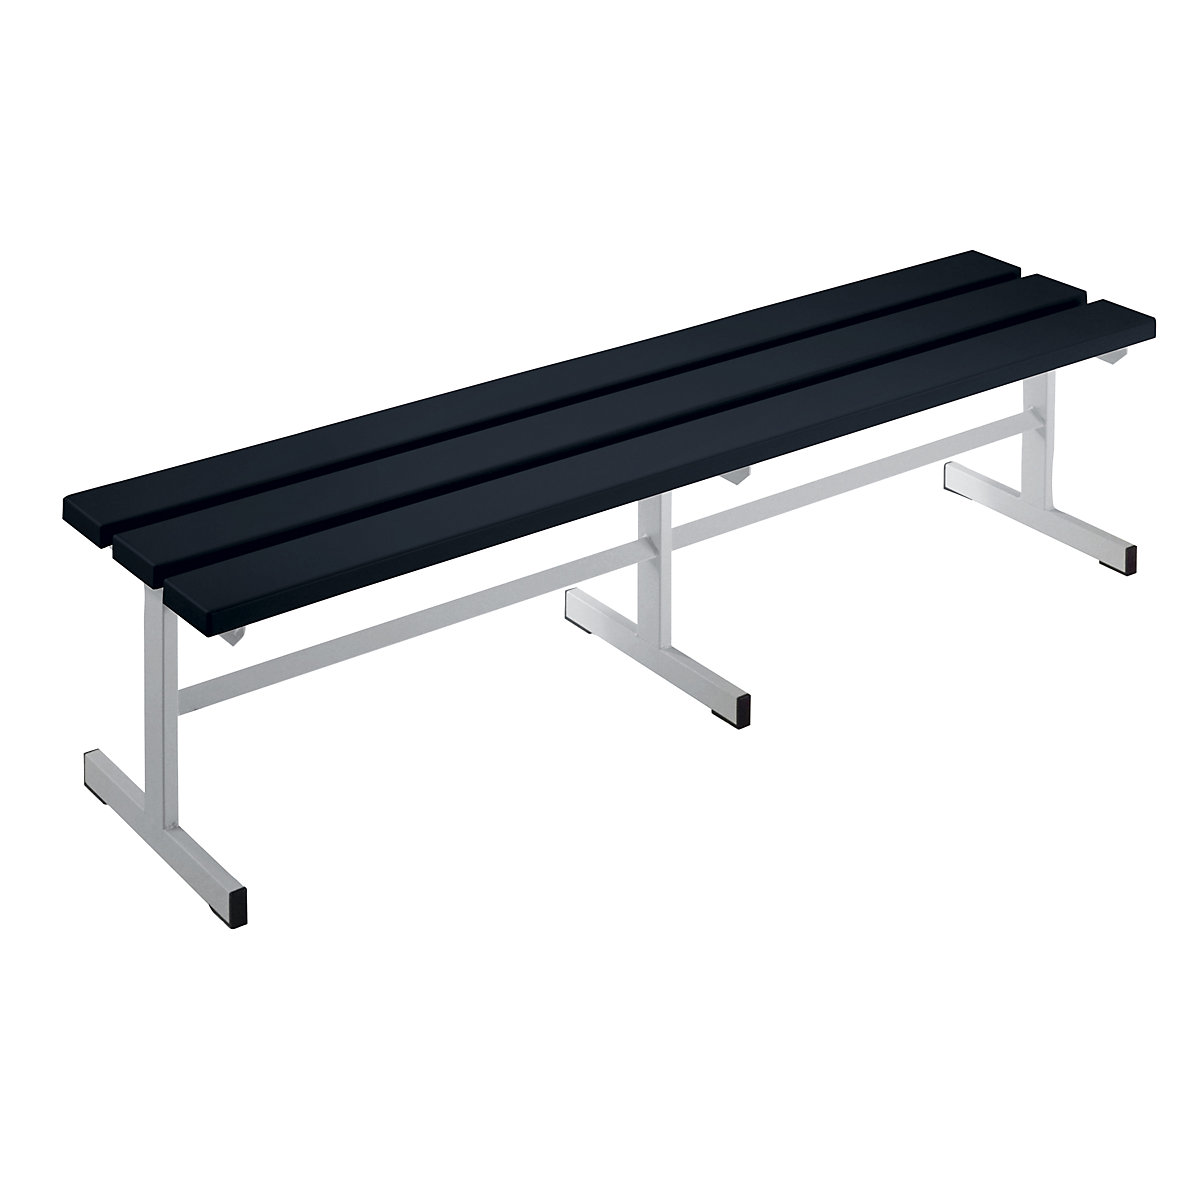 Wolf – Cloakroom bench, single sided seat, black, 1500 mm length